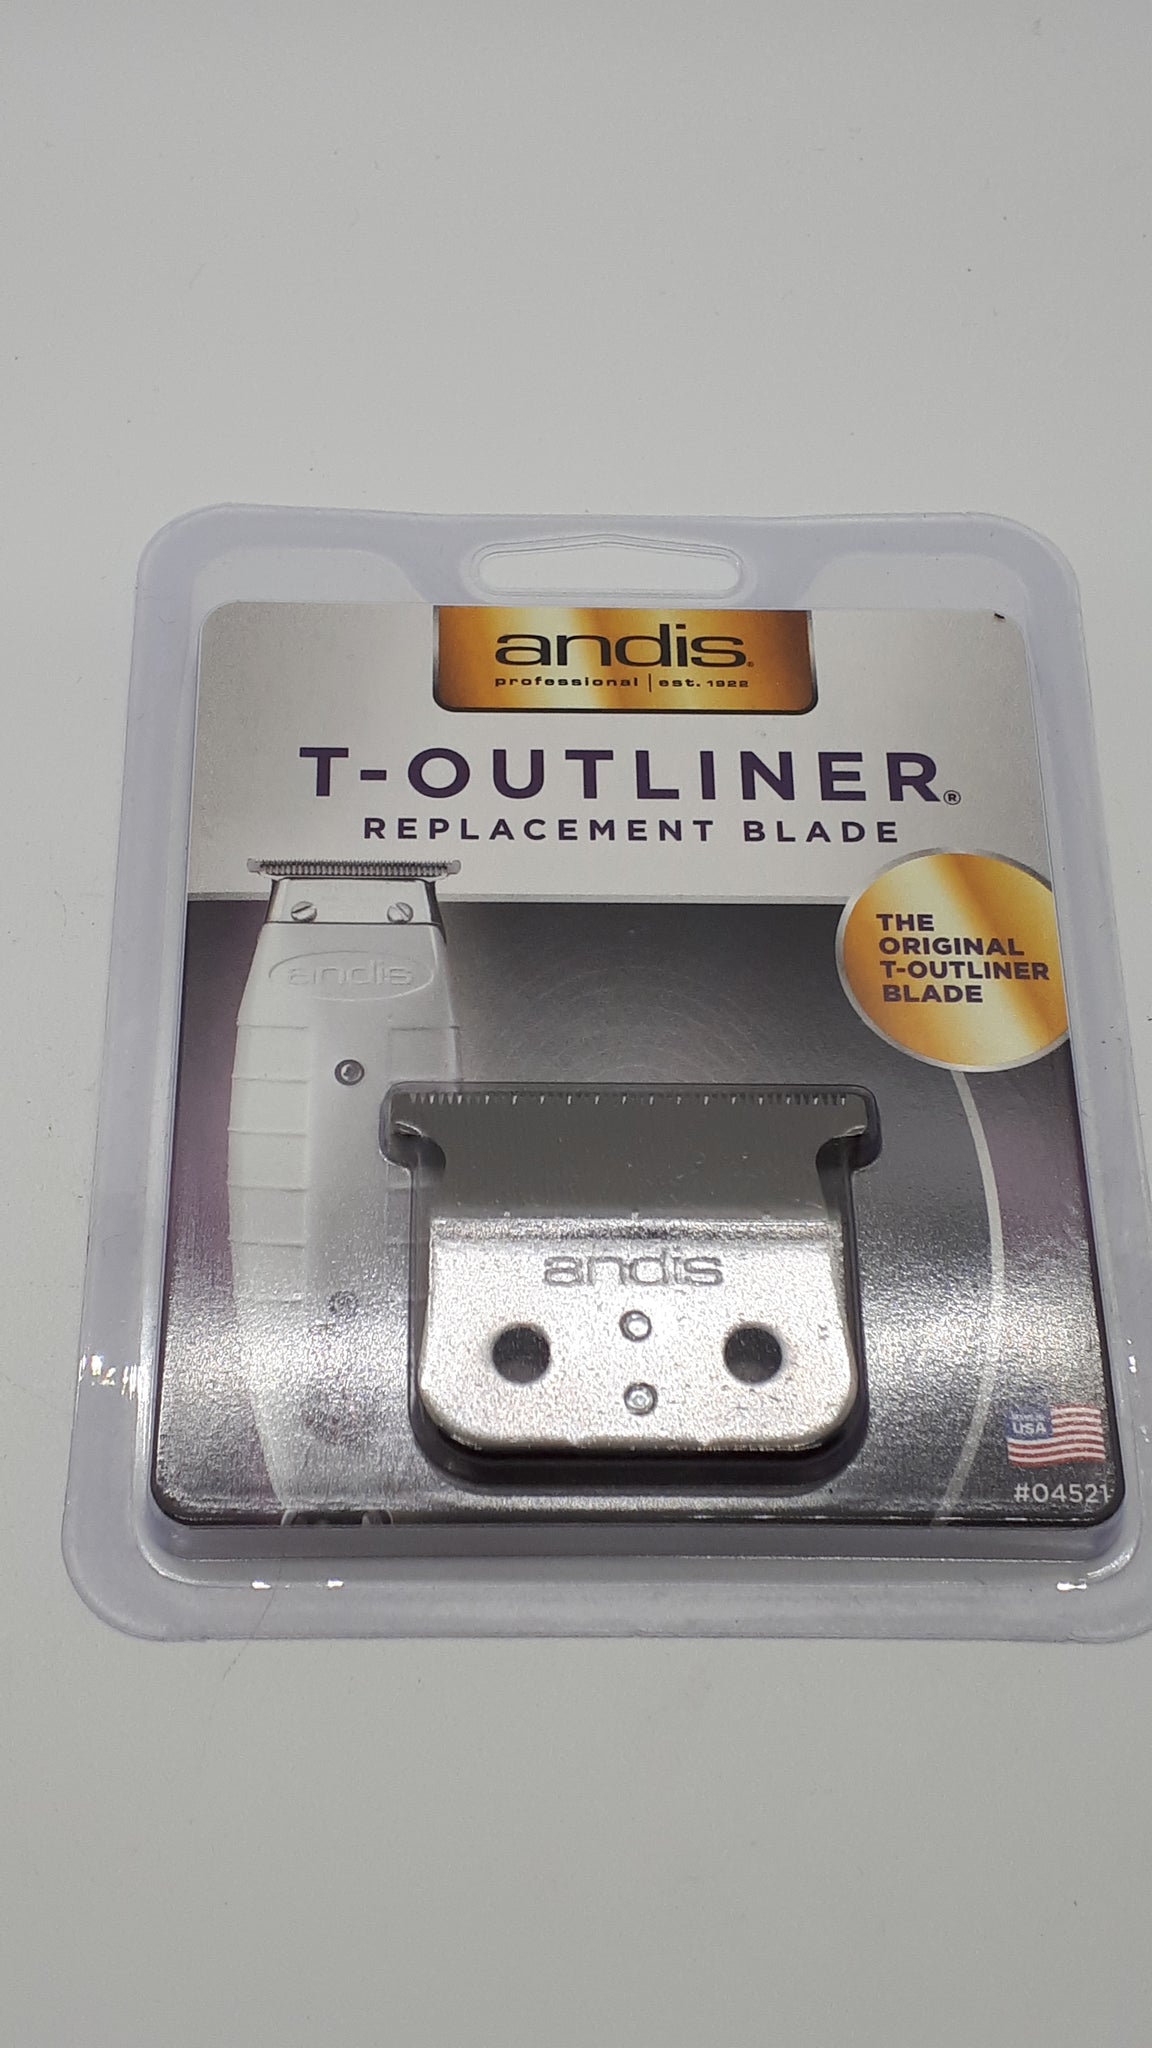 T-Outliner® Replacement Blade - Stainless Steel